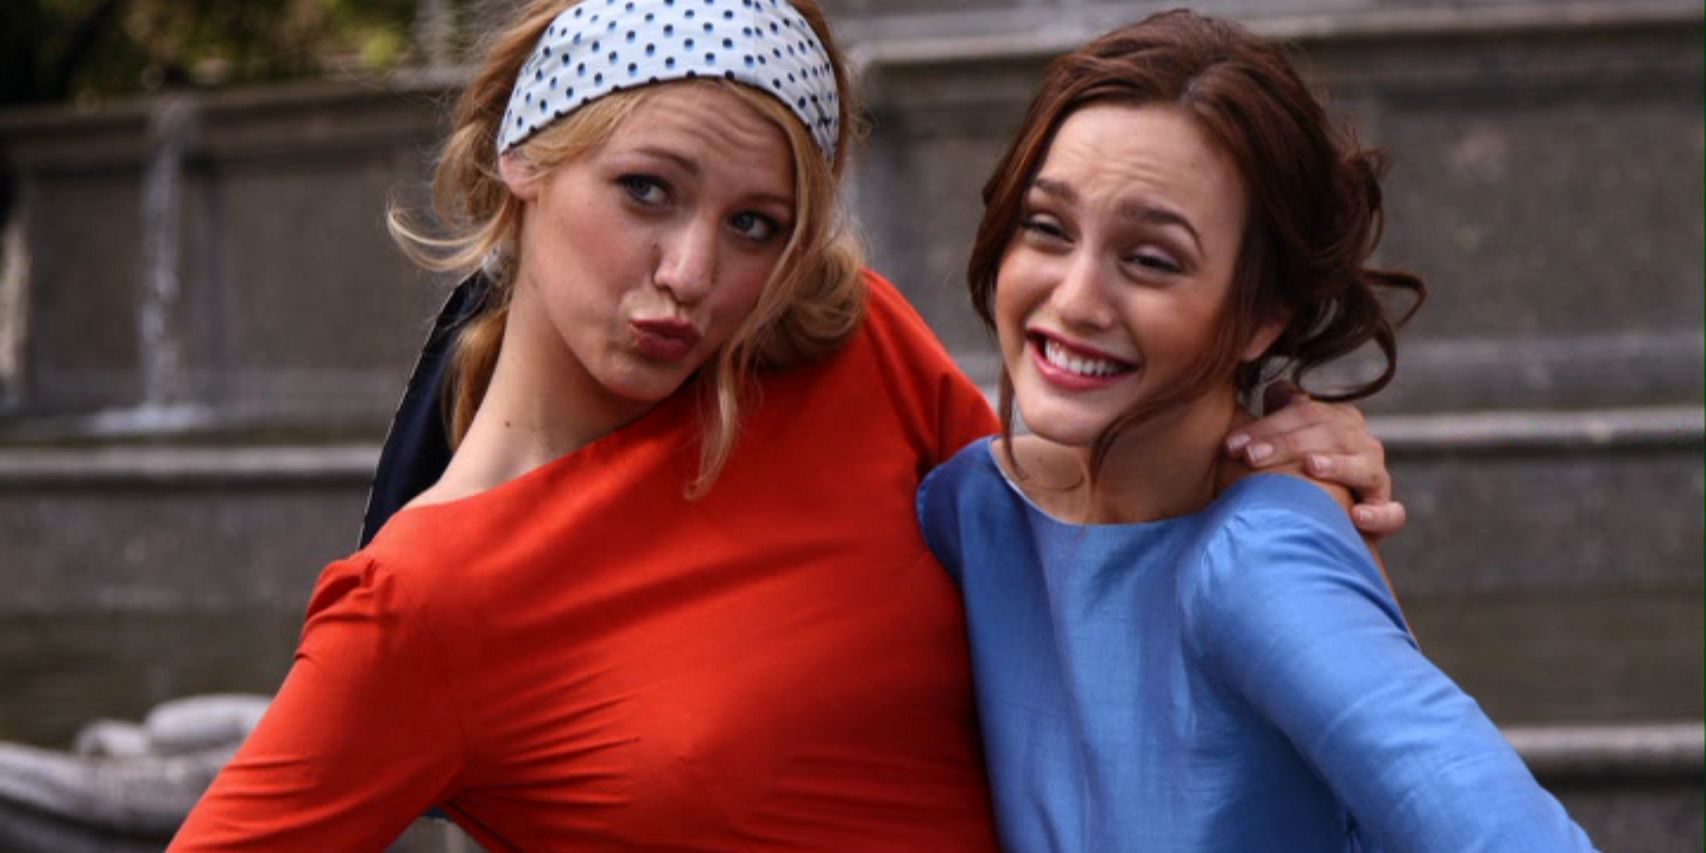 Blair and Serena pose in Central Park in Gossip Girl.